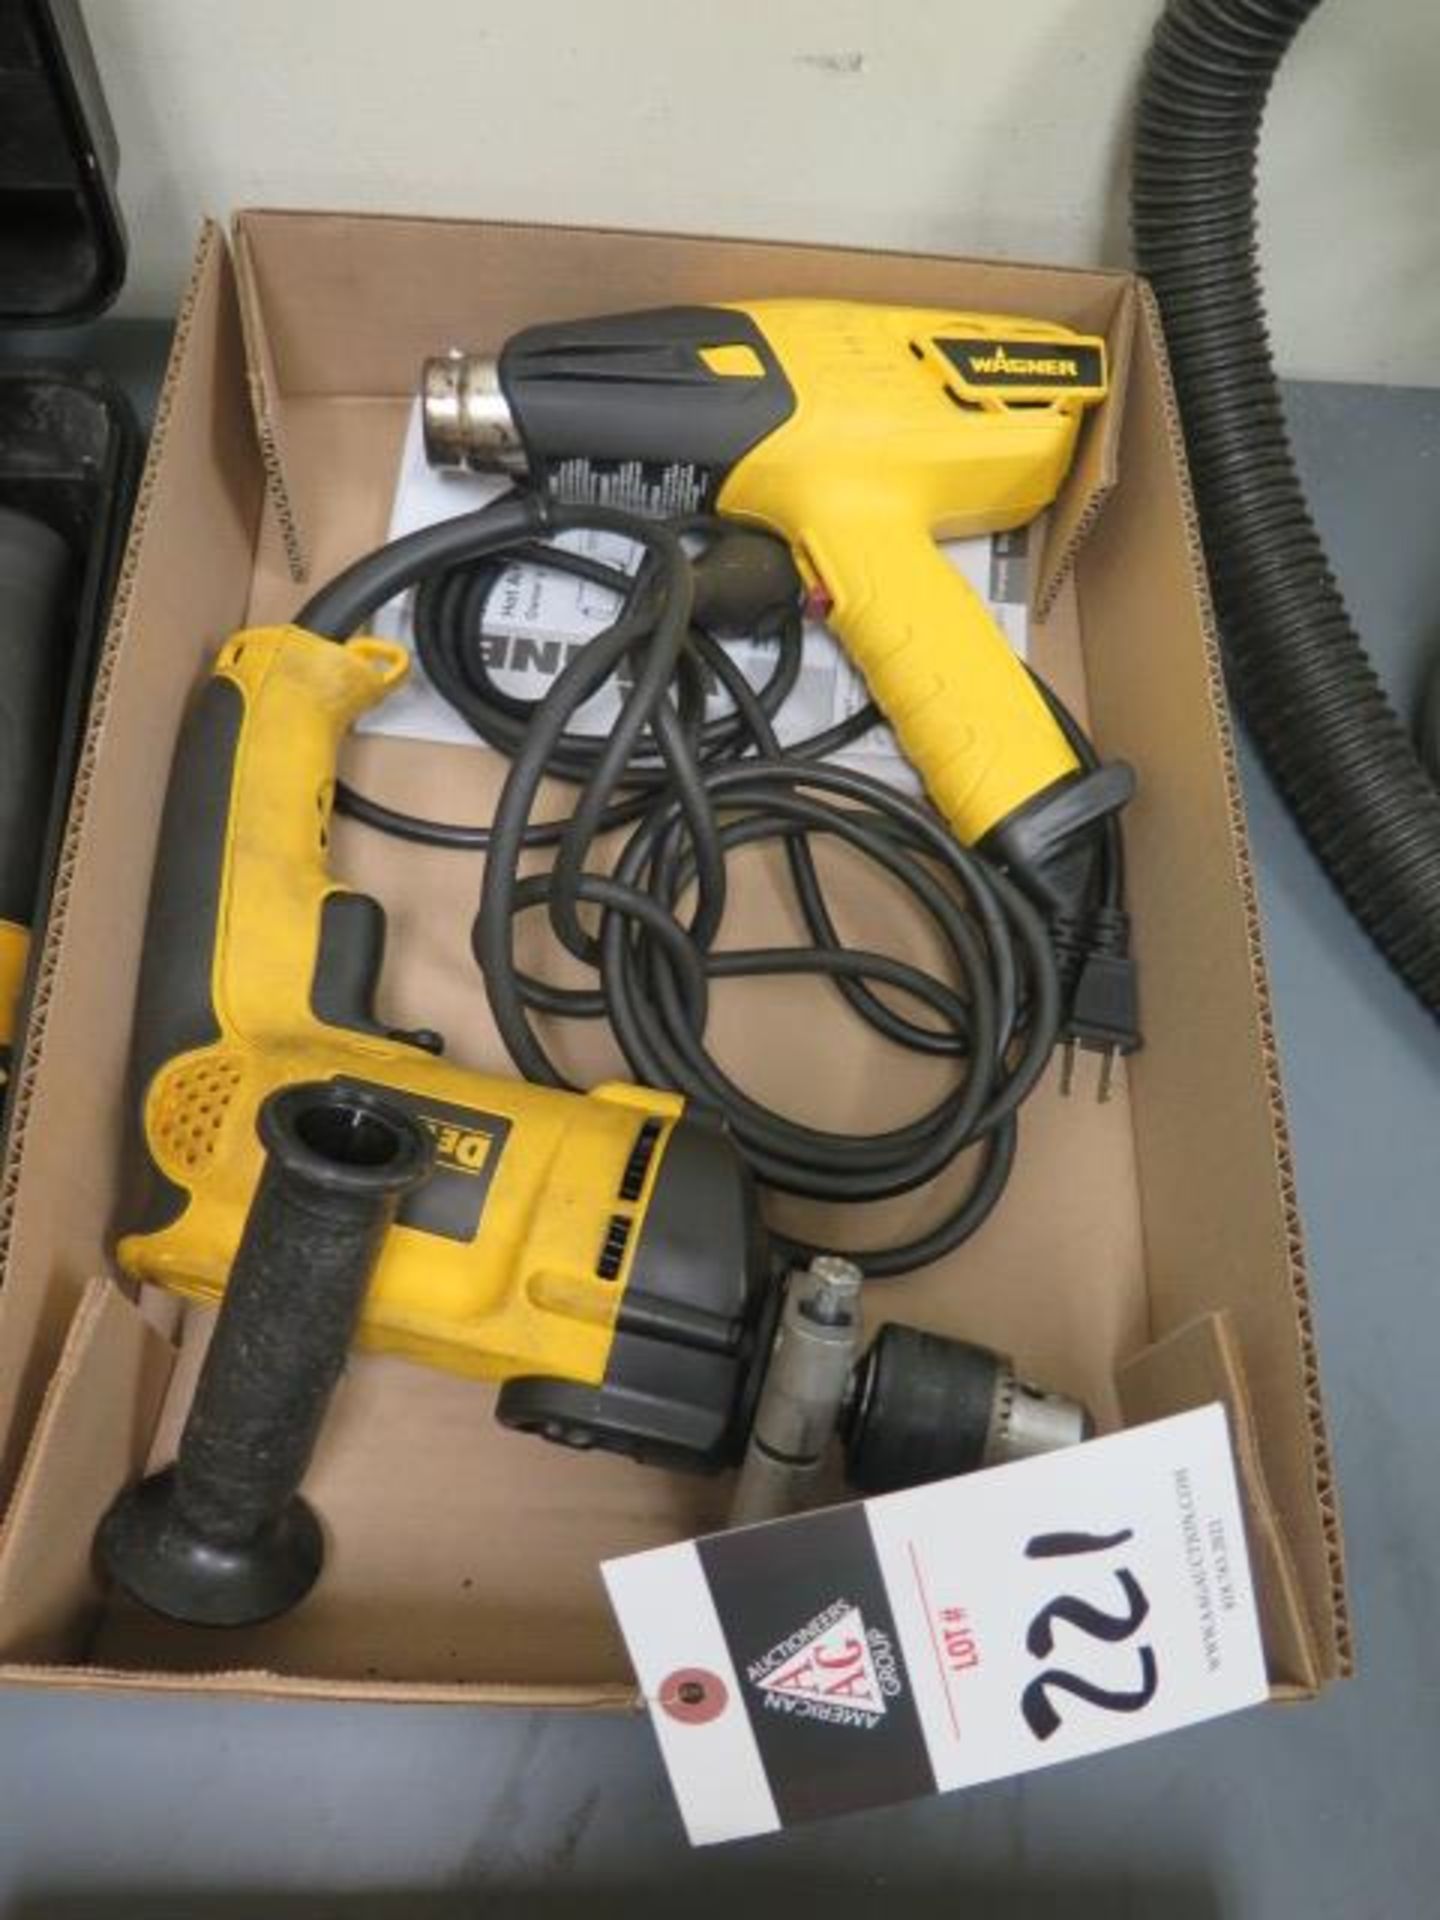 DeWalt Electric Drill and Wagner Heat Gun (SOLD AS-IS - NO WARRANTY)